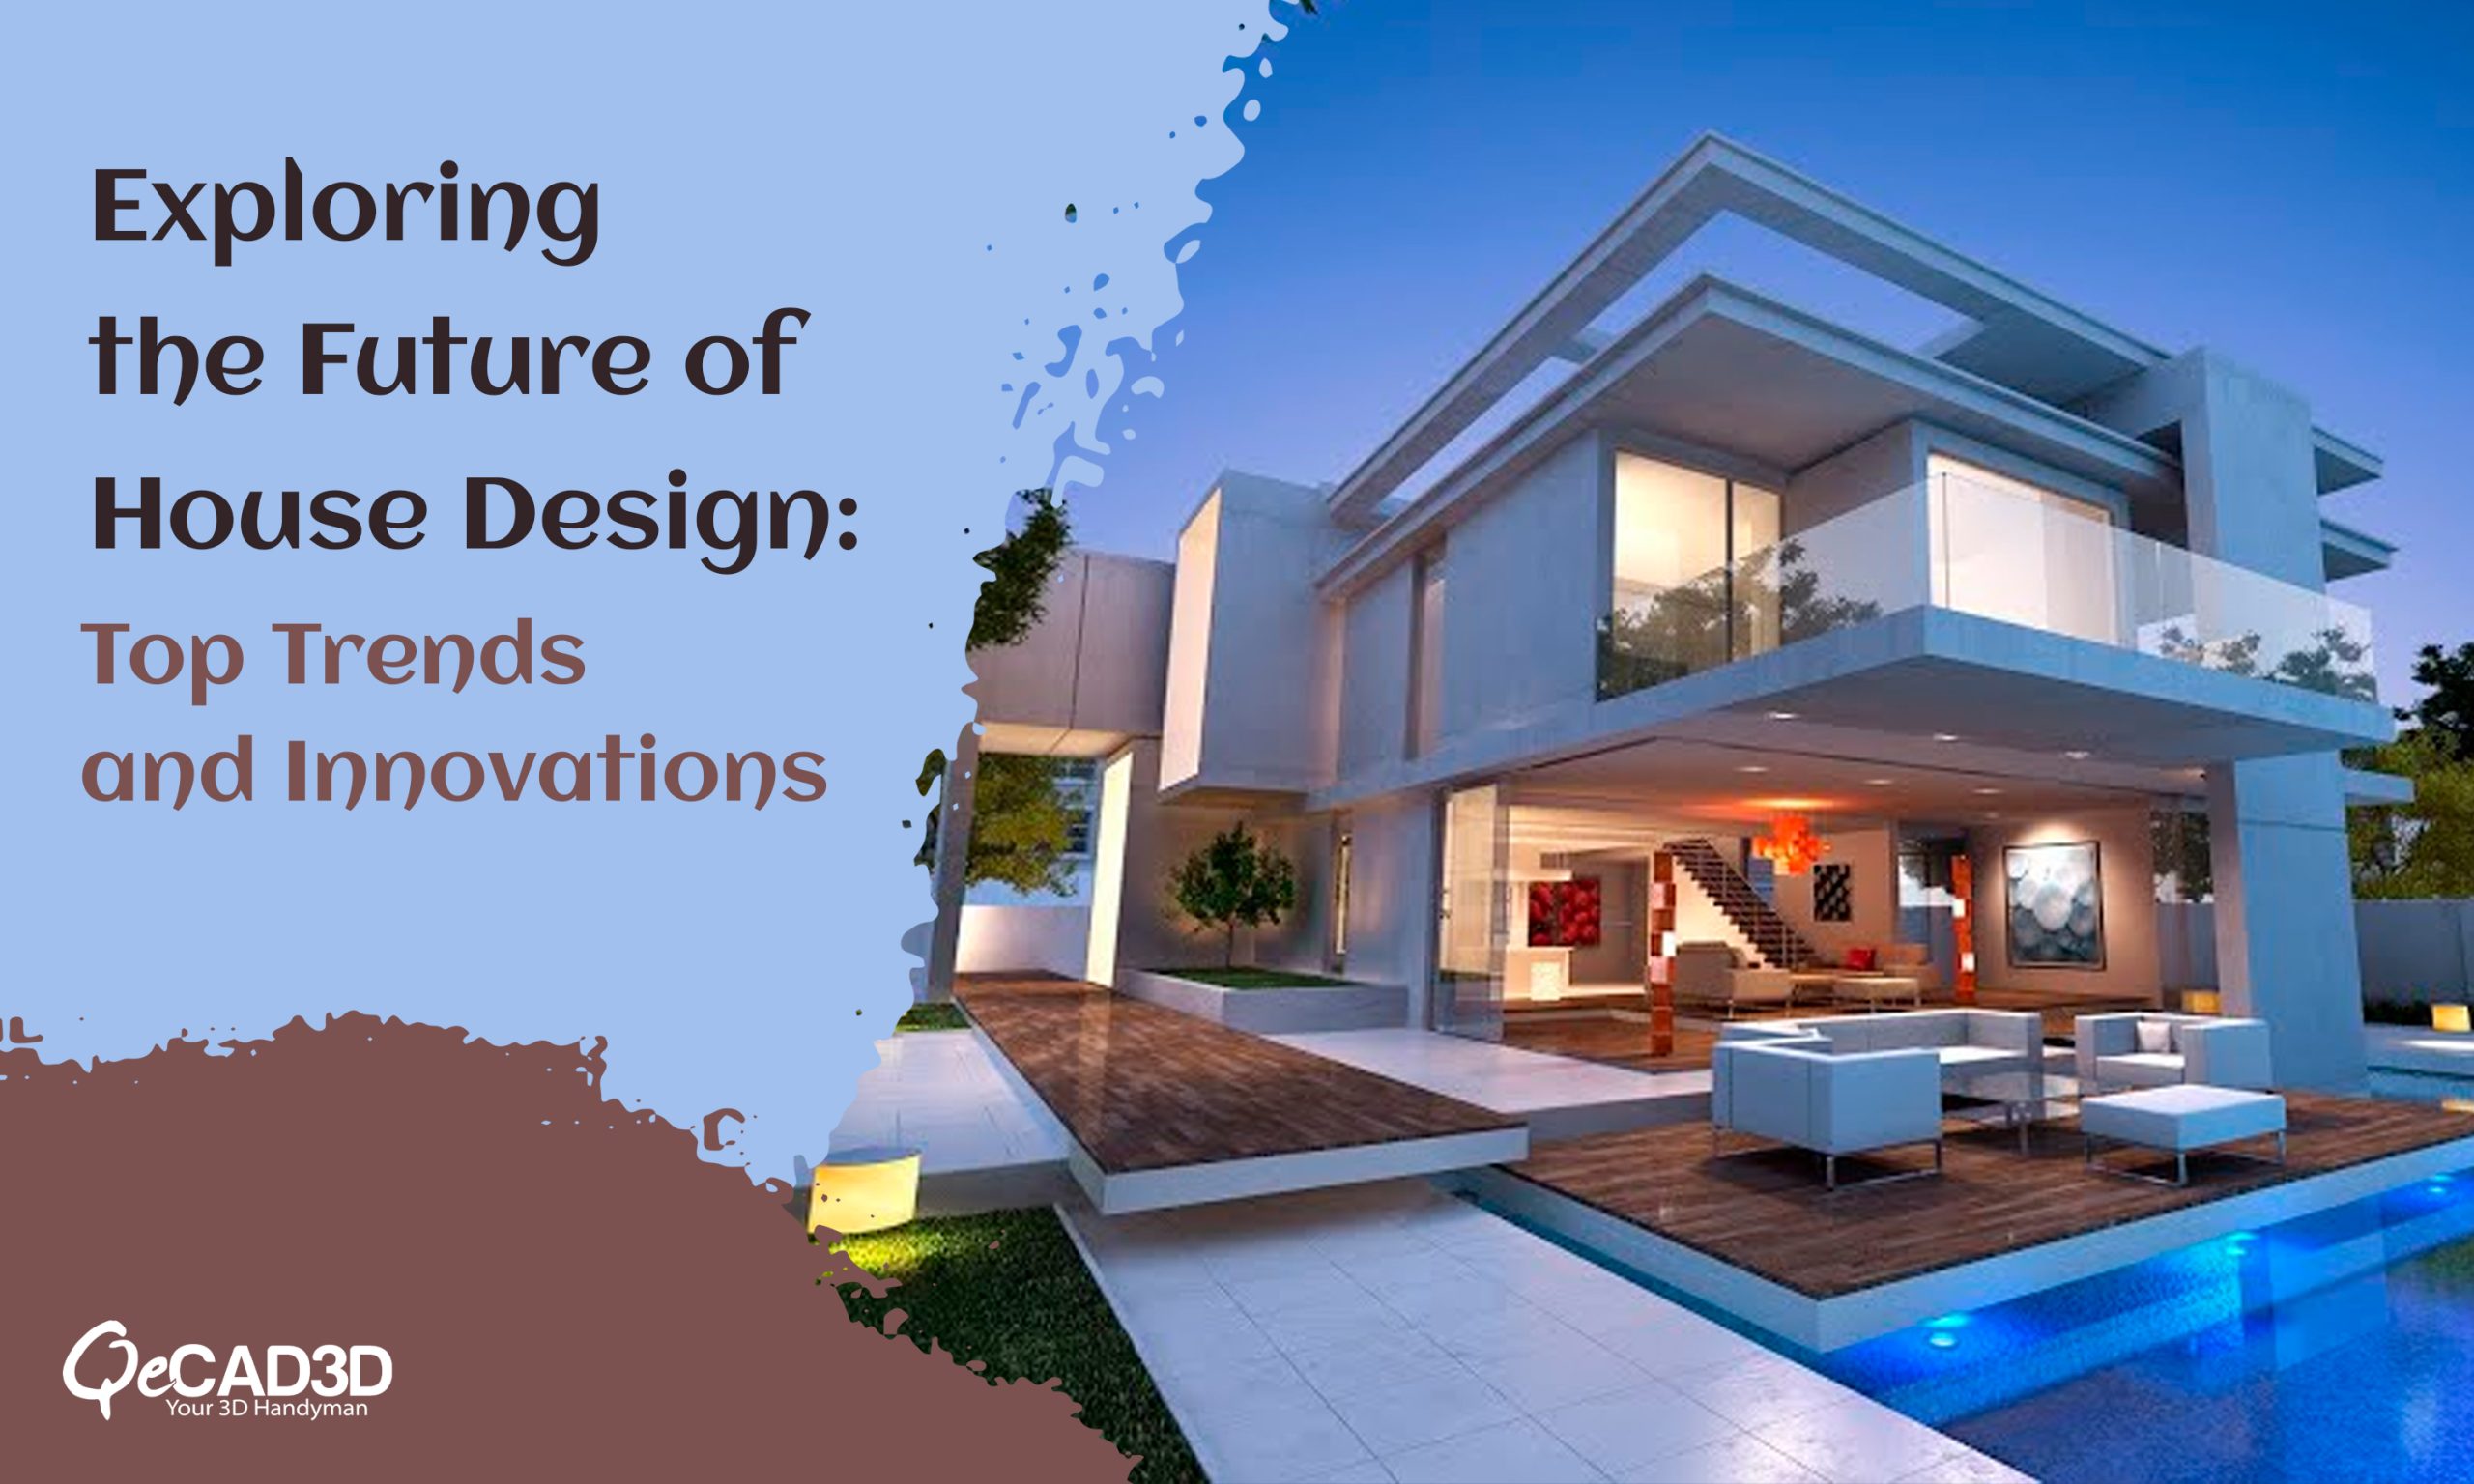 Exploring the Future of House Design: Top Trends and Innovations